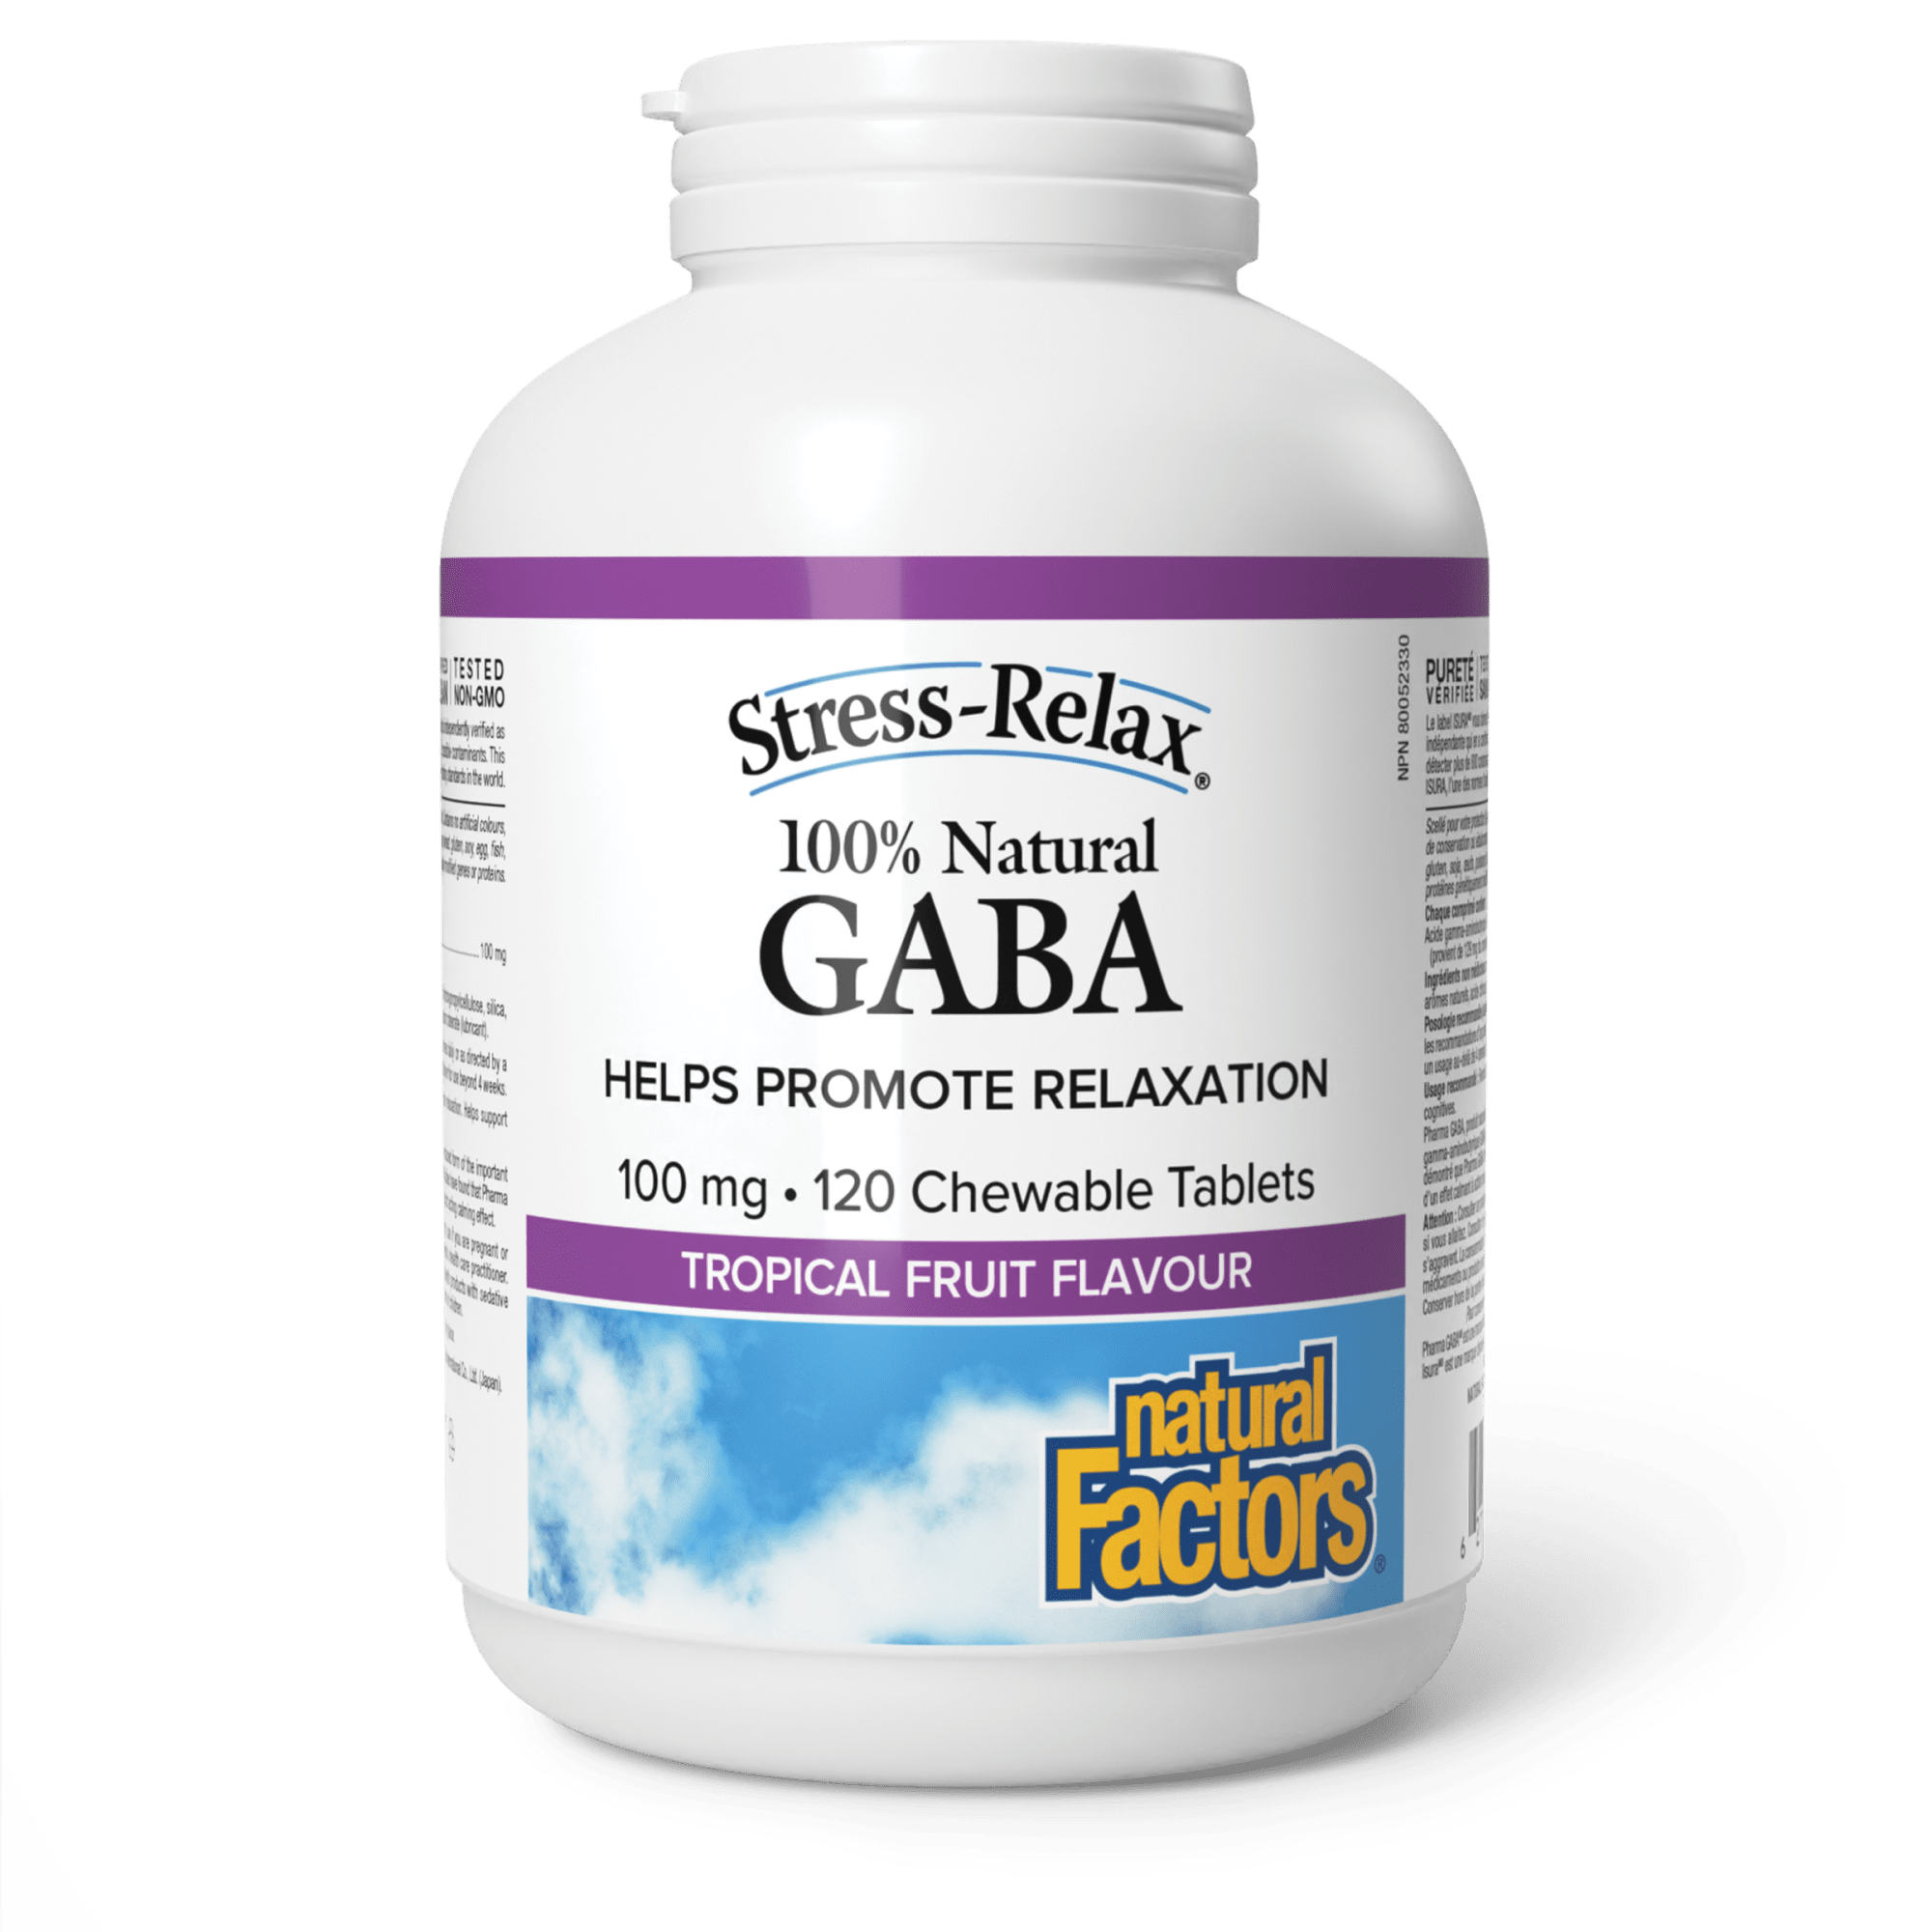 Natural Factors Stress-Relax 100% Natural GABA 100mg 120 Chewable Tablets Tropical Fruit